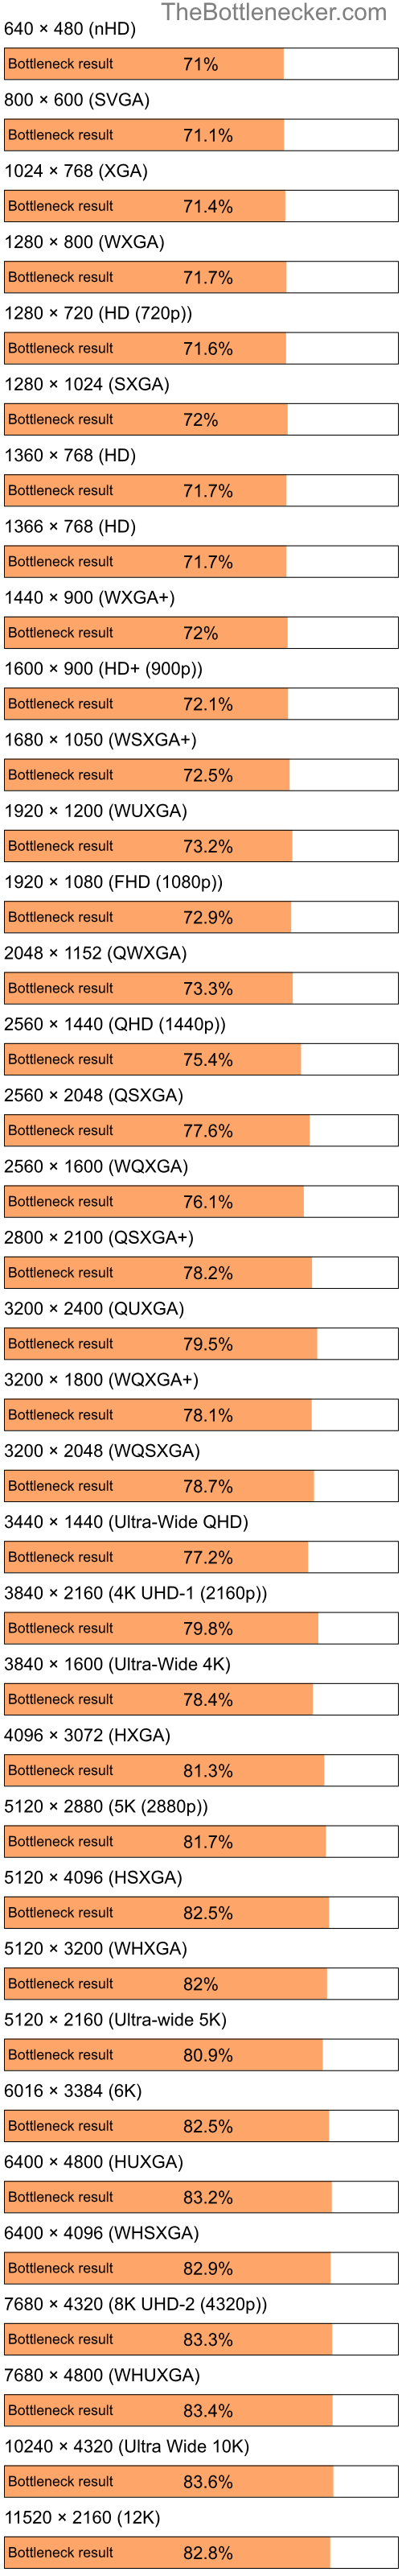 Bottleneck results by resolution for Intel Pentium 4 and AMD Radeon X1250 in Processor Intense Tasks